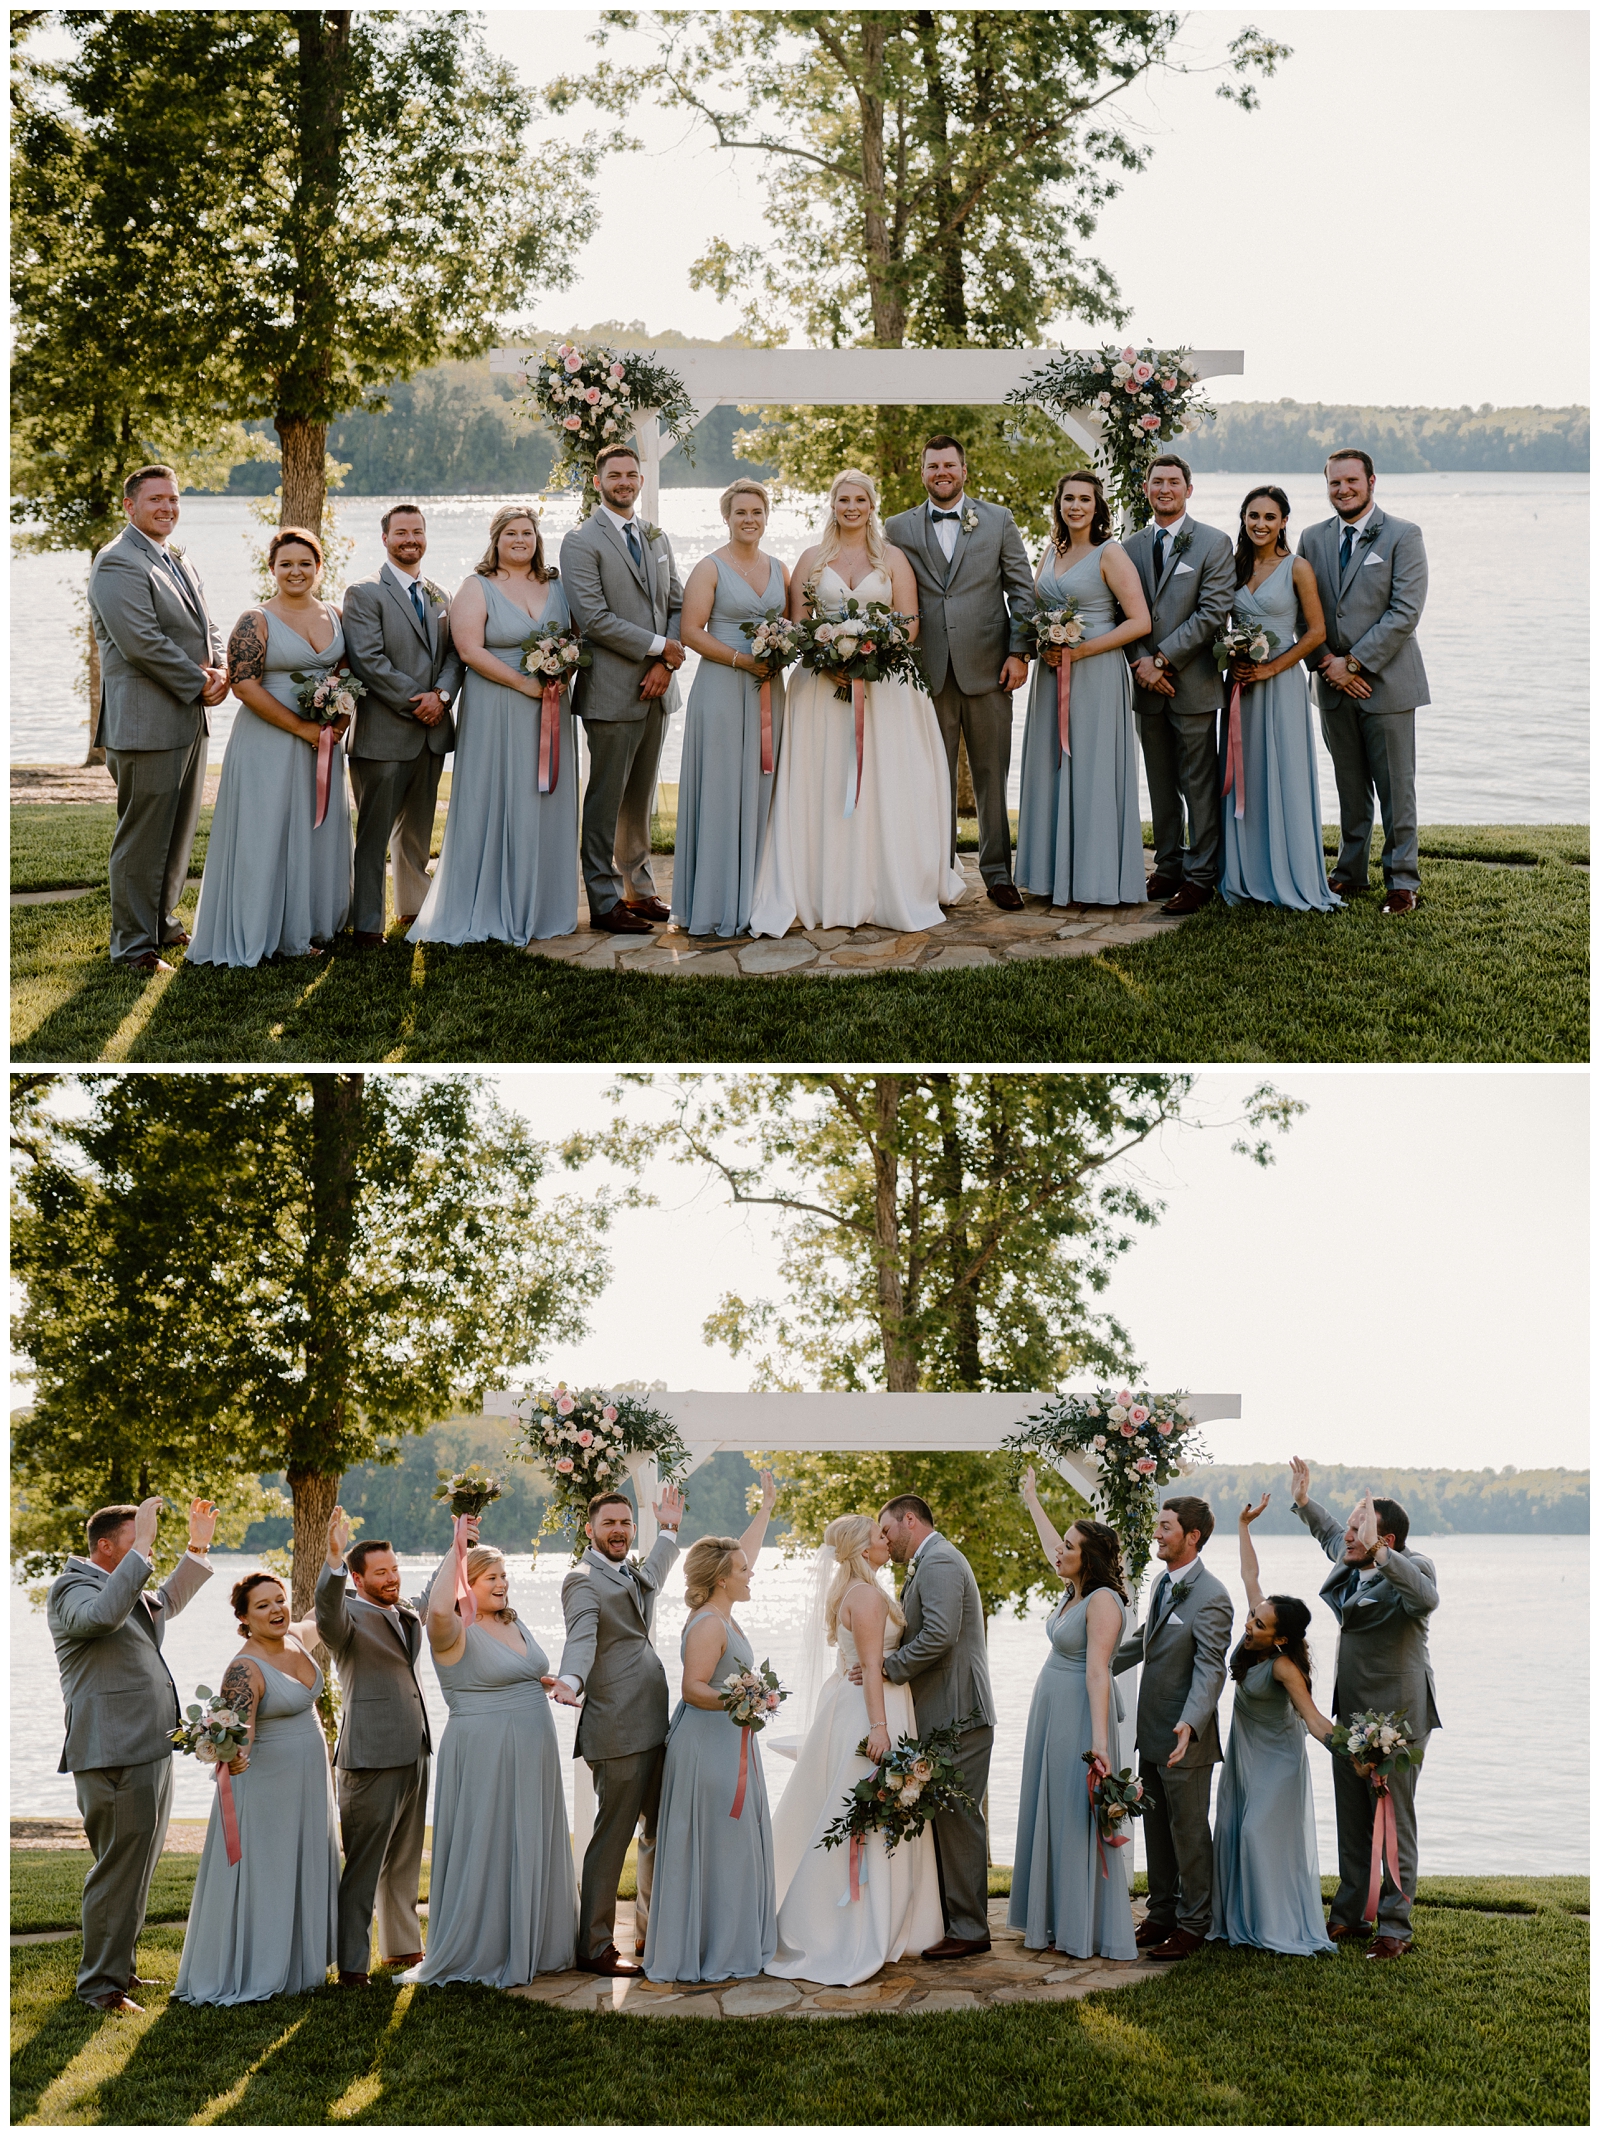 Wedding and Bridal Party portraits at southern lakeside venue in Triad, North Carolina - by NC wedding photographer